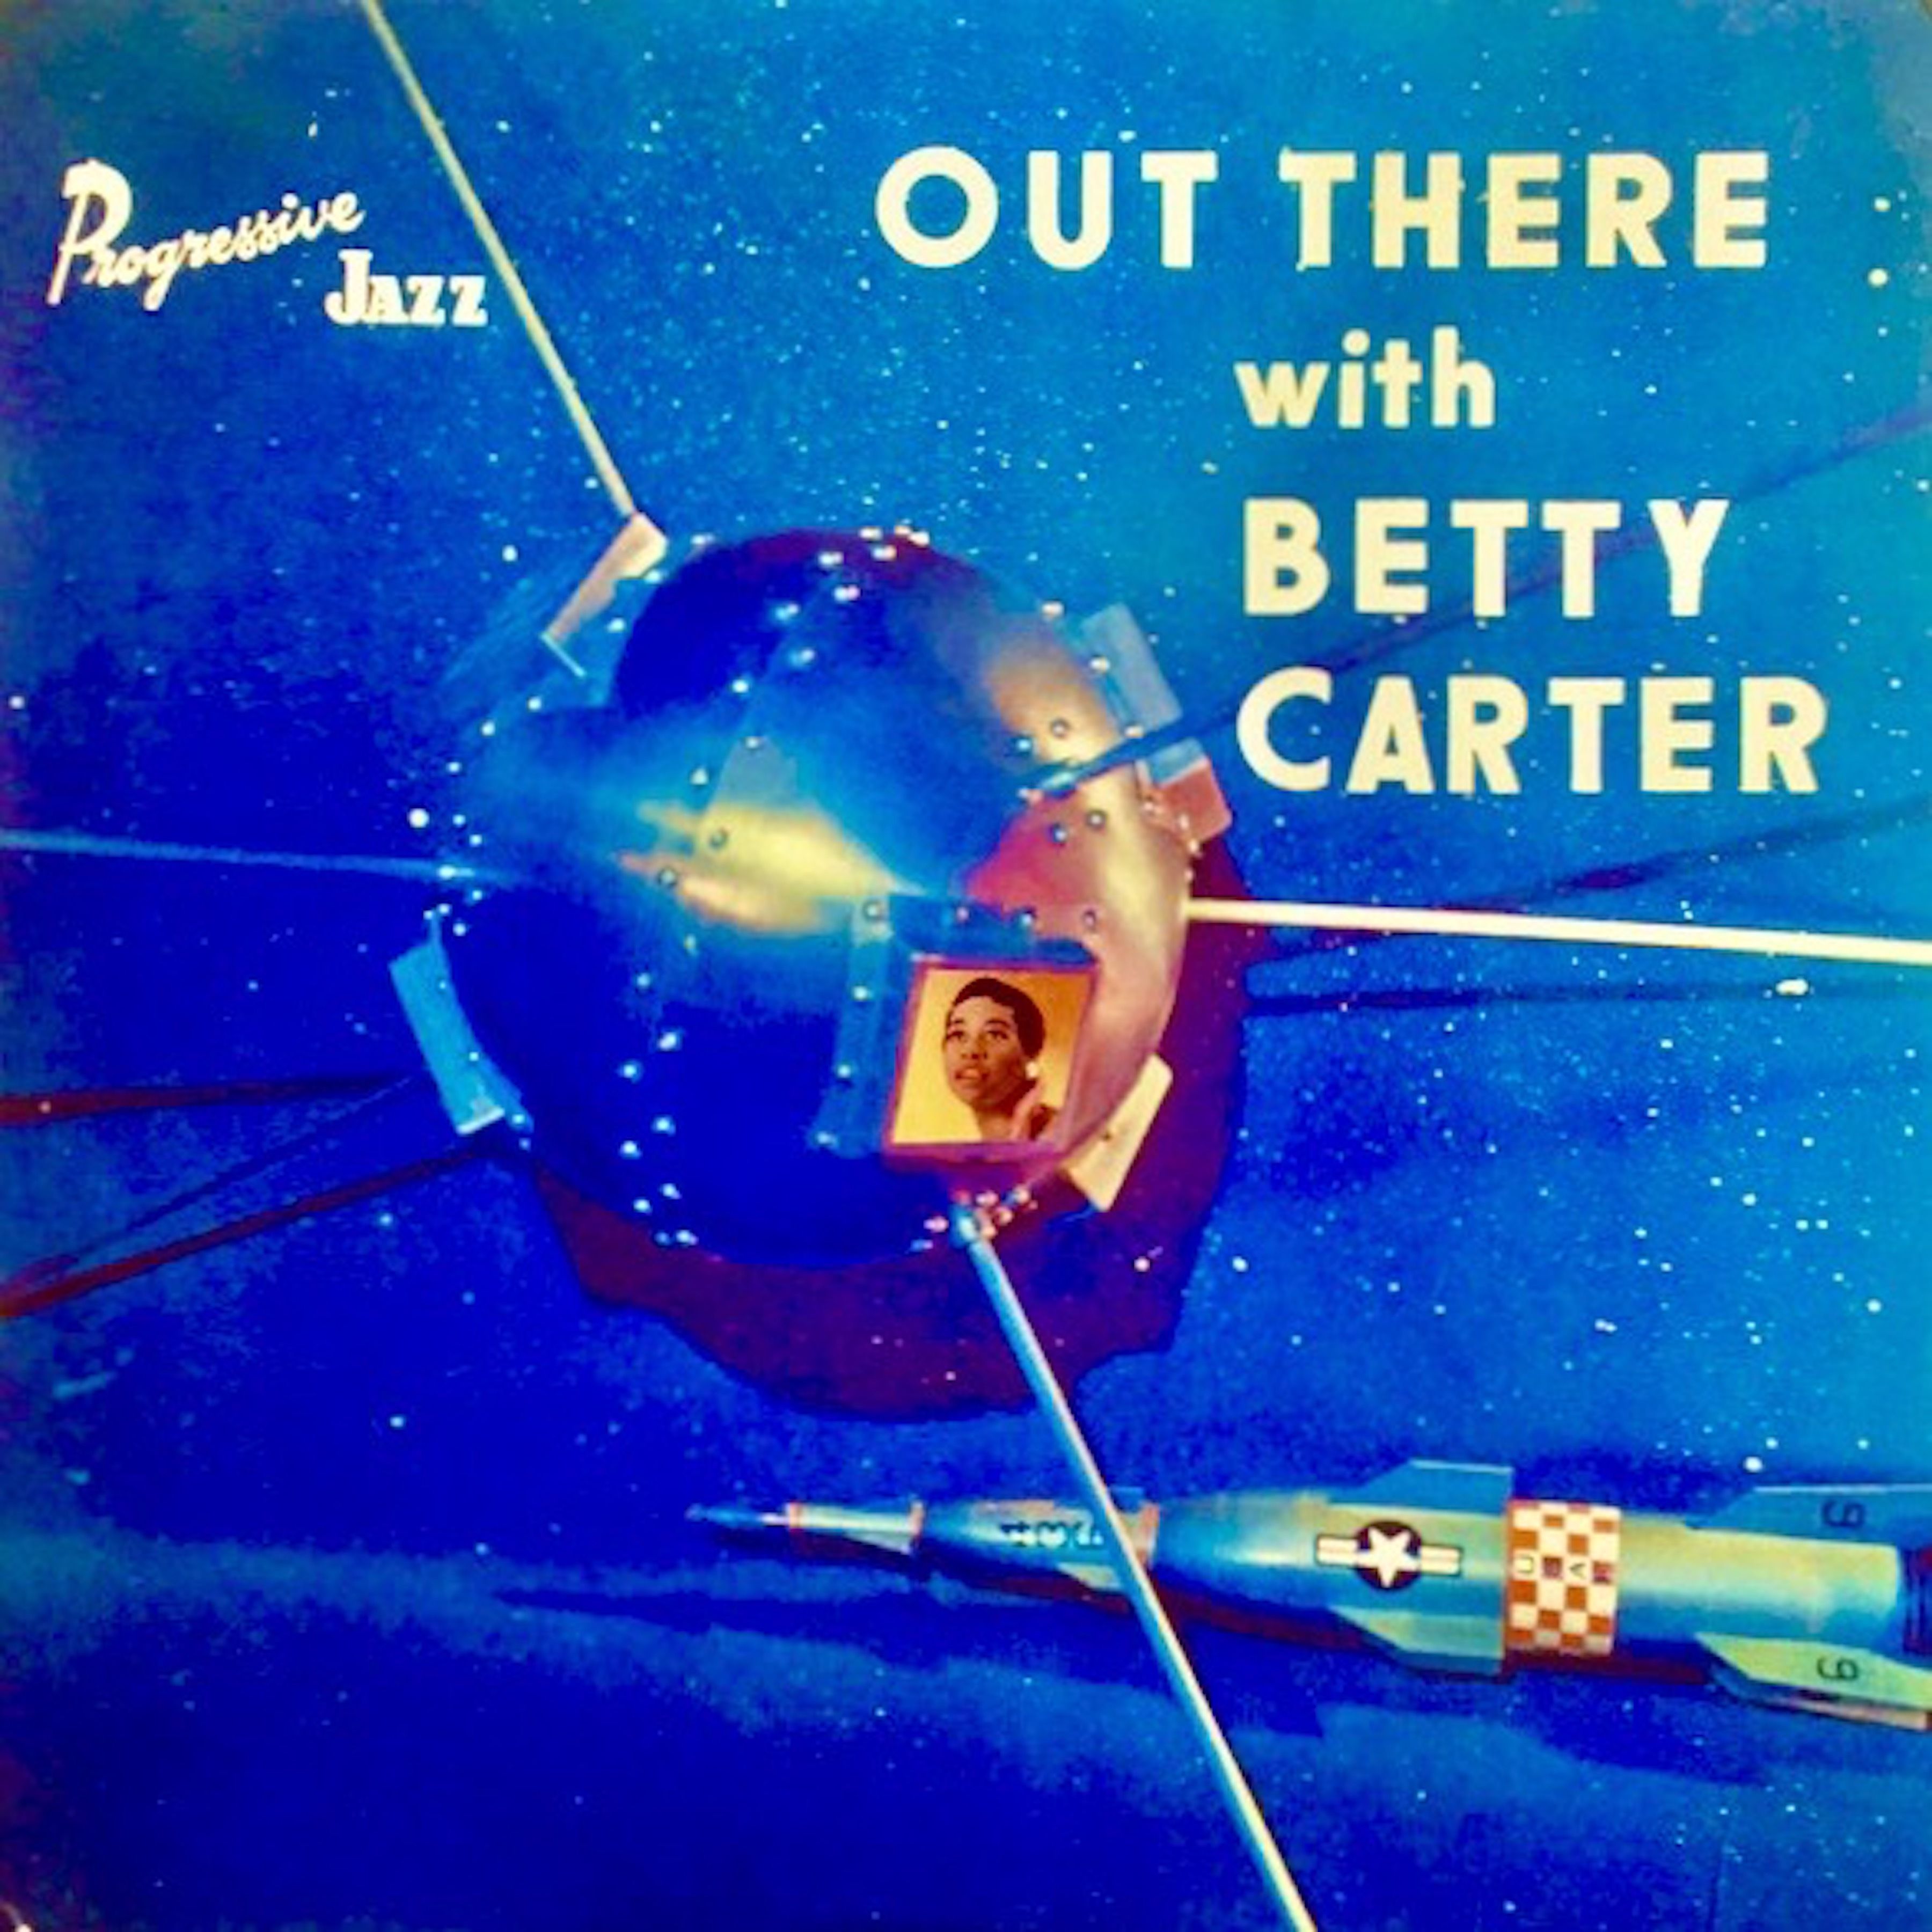 Betty Carter - Out There With Betty Carter (1958/2021) [FLAC 24bit/96kHz]